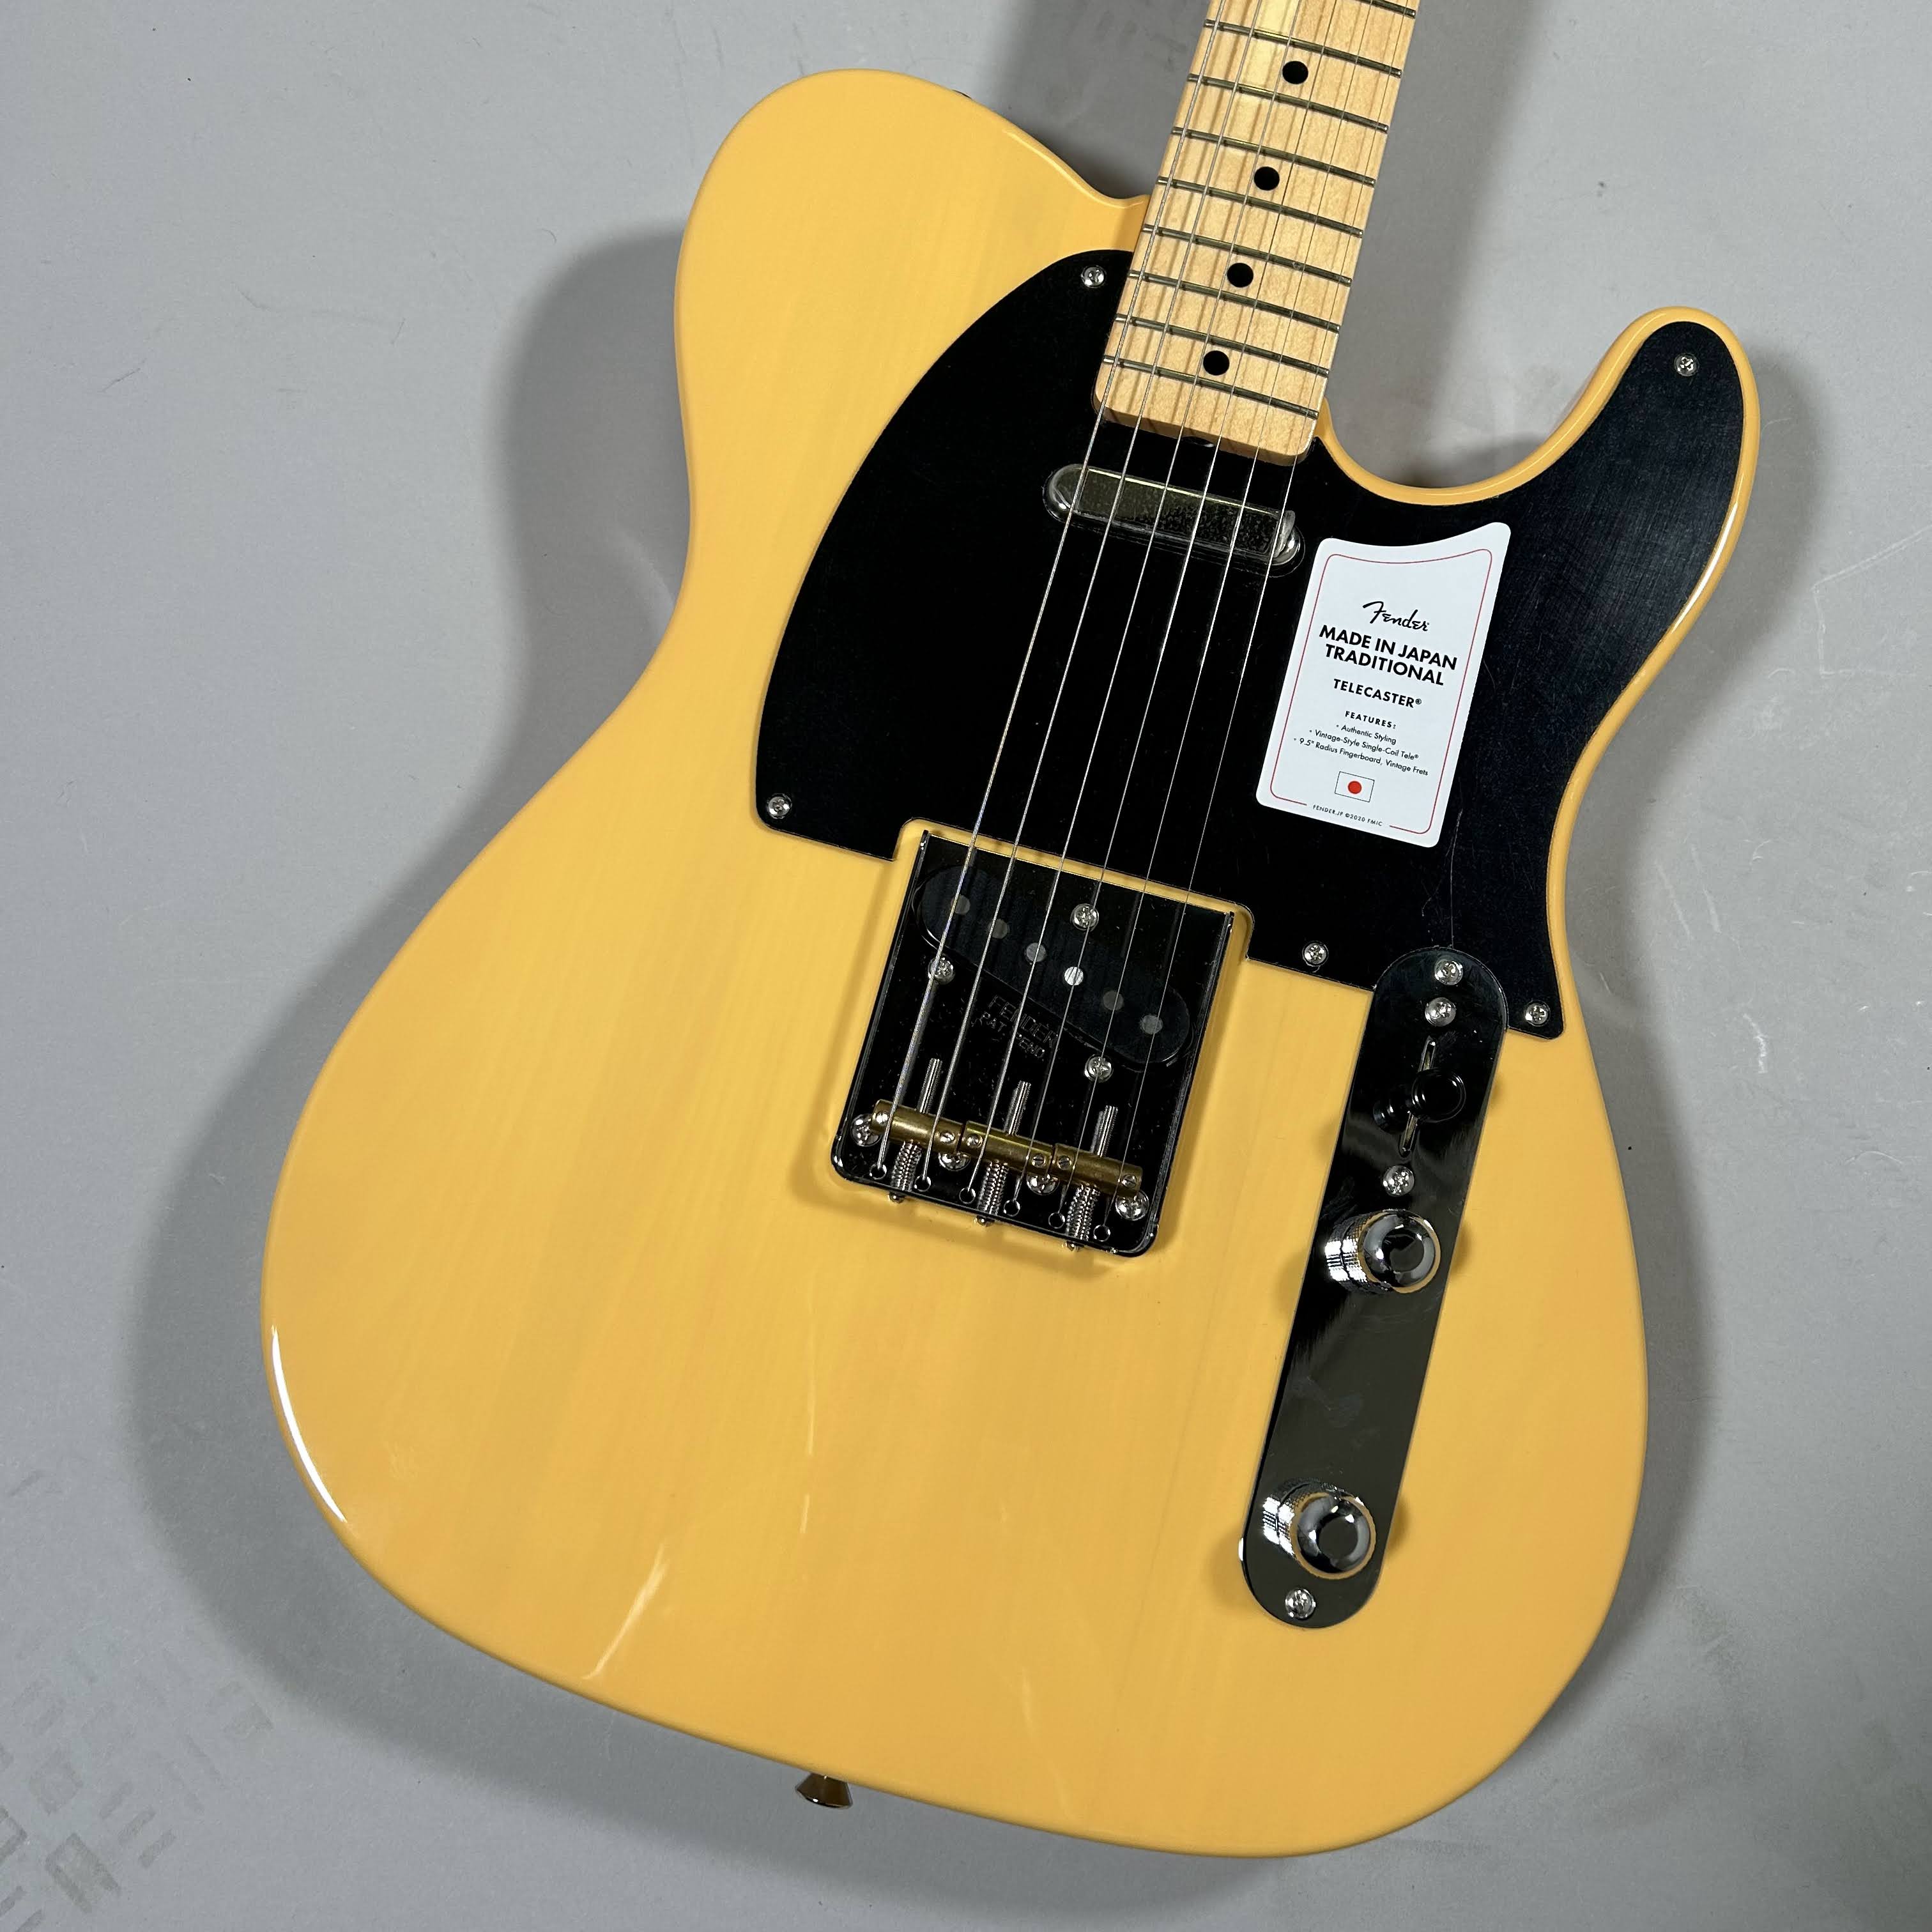 Fender Made in Japan Traditional 50s Telecaster Maple Fingerboard